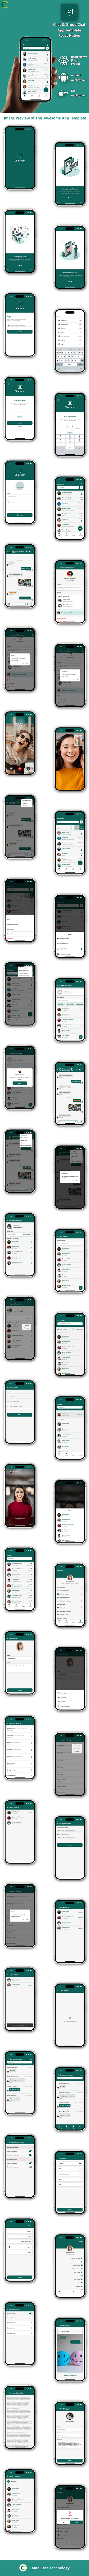 WhatsApp Clone App Template in React Native | Chat & Group Chat App Template | Multi Language - 7